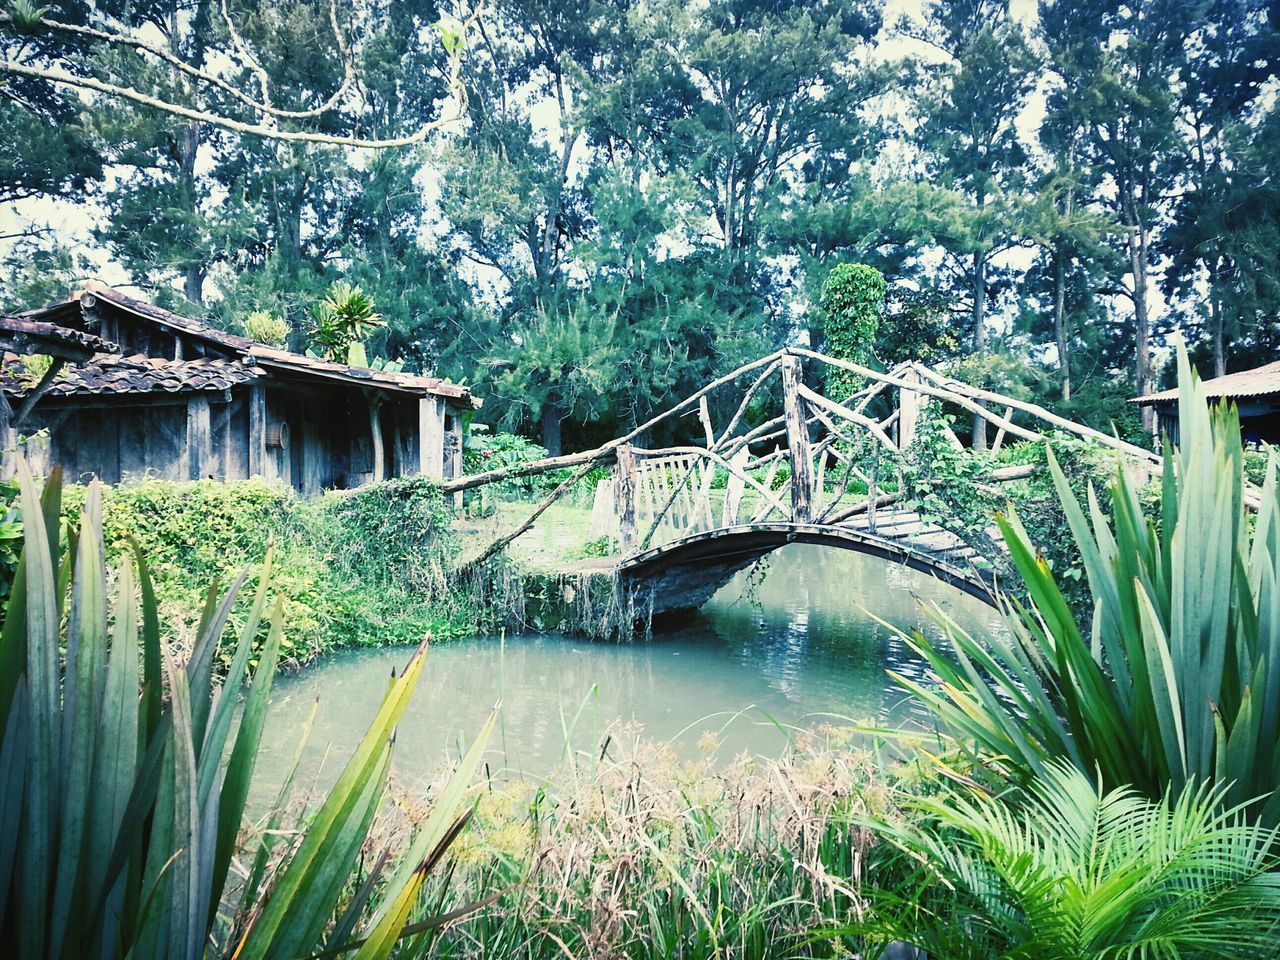 water, built structure, architecture, plant, building exterior, tree, growth, house, grass, green color, nature, canal, day, bridge - man made structure, outdoors, river, no people, pond, residential structure, connection